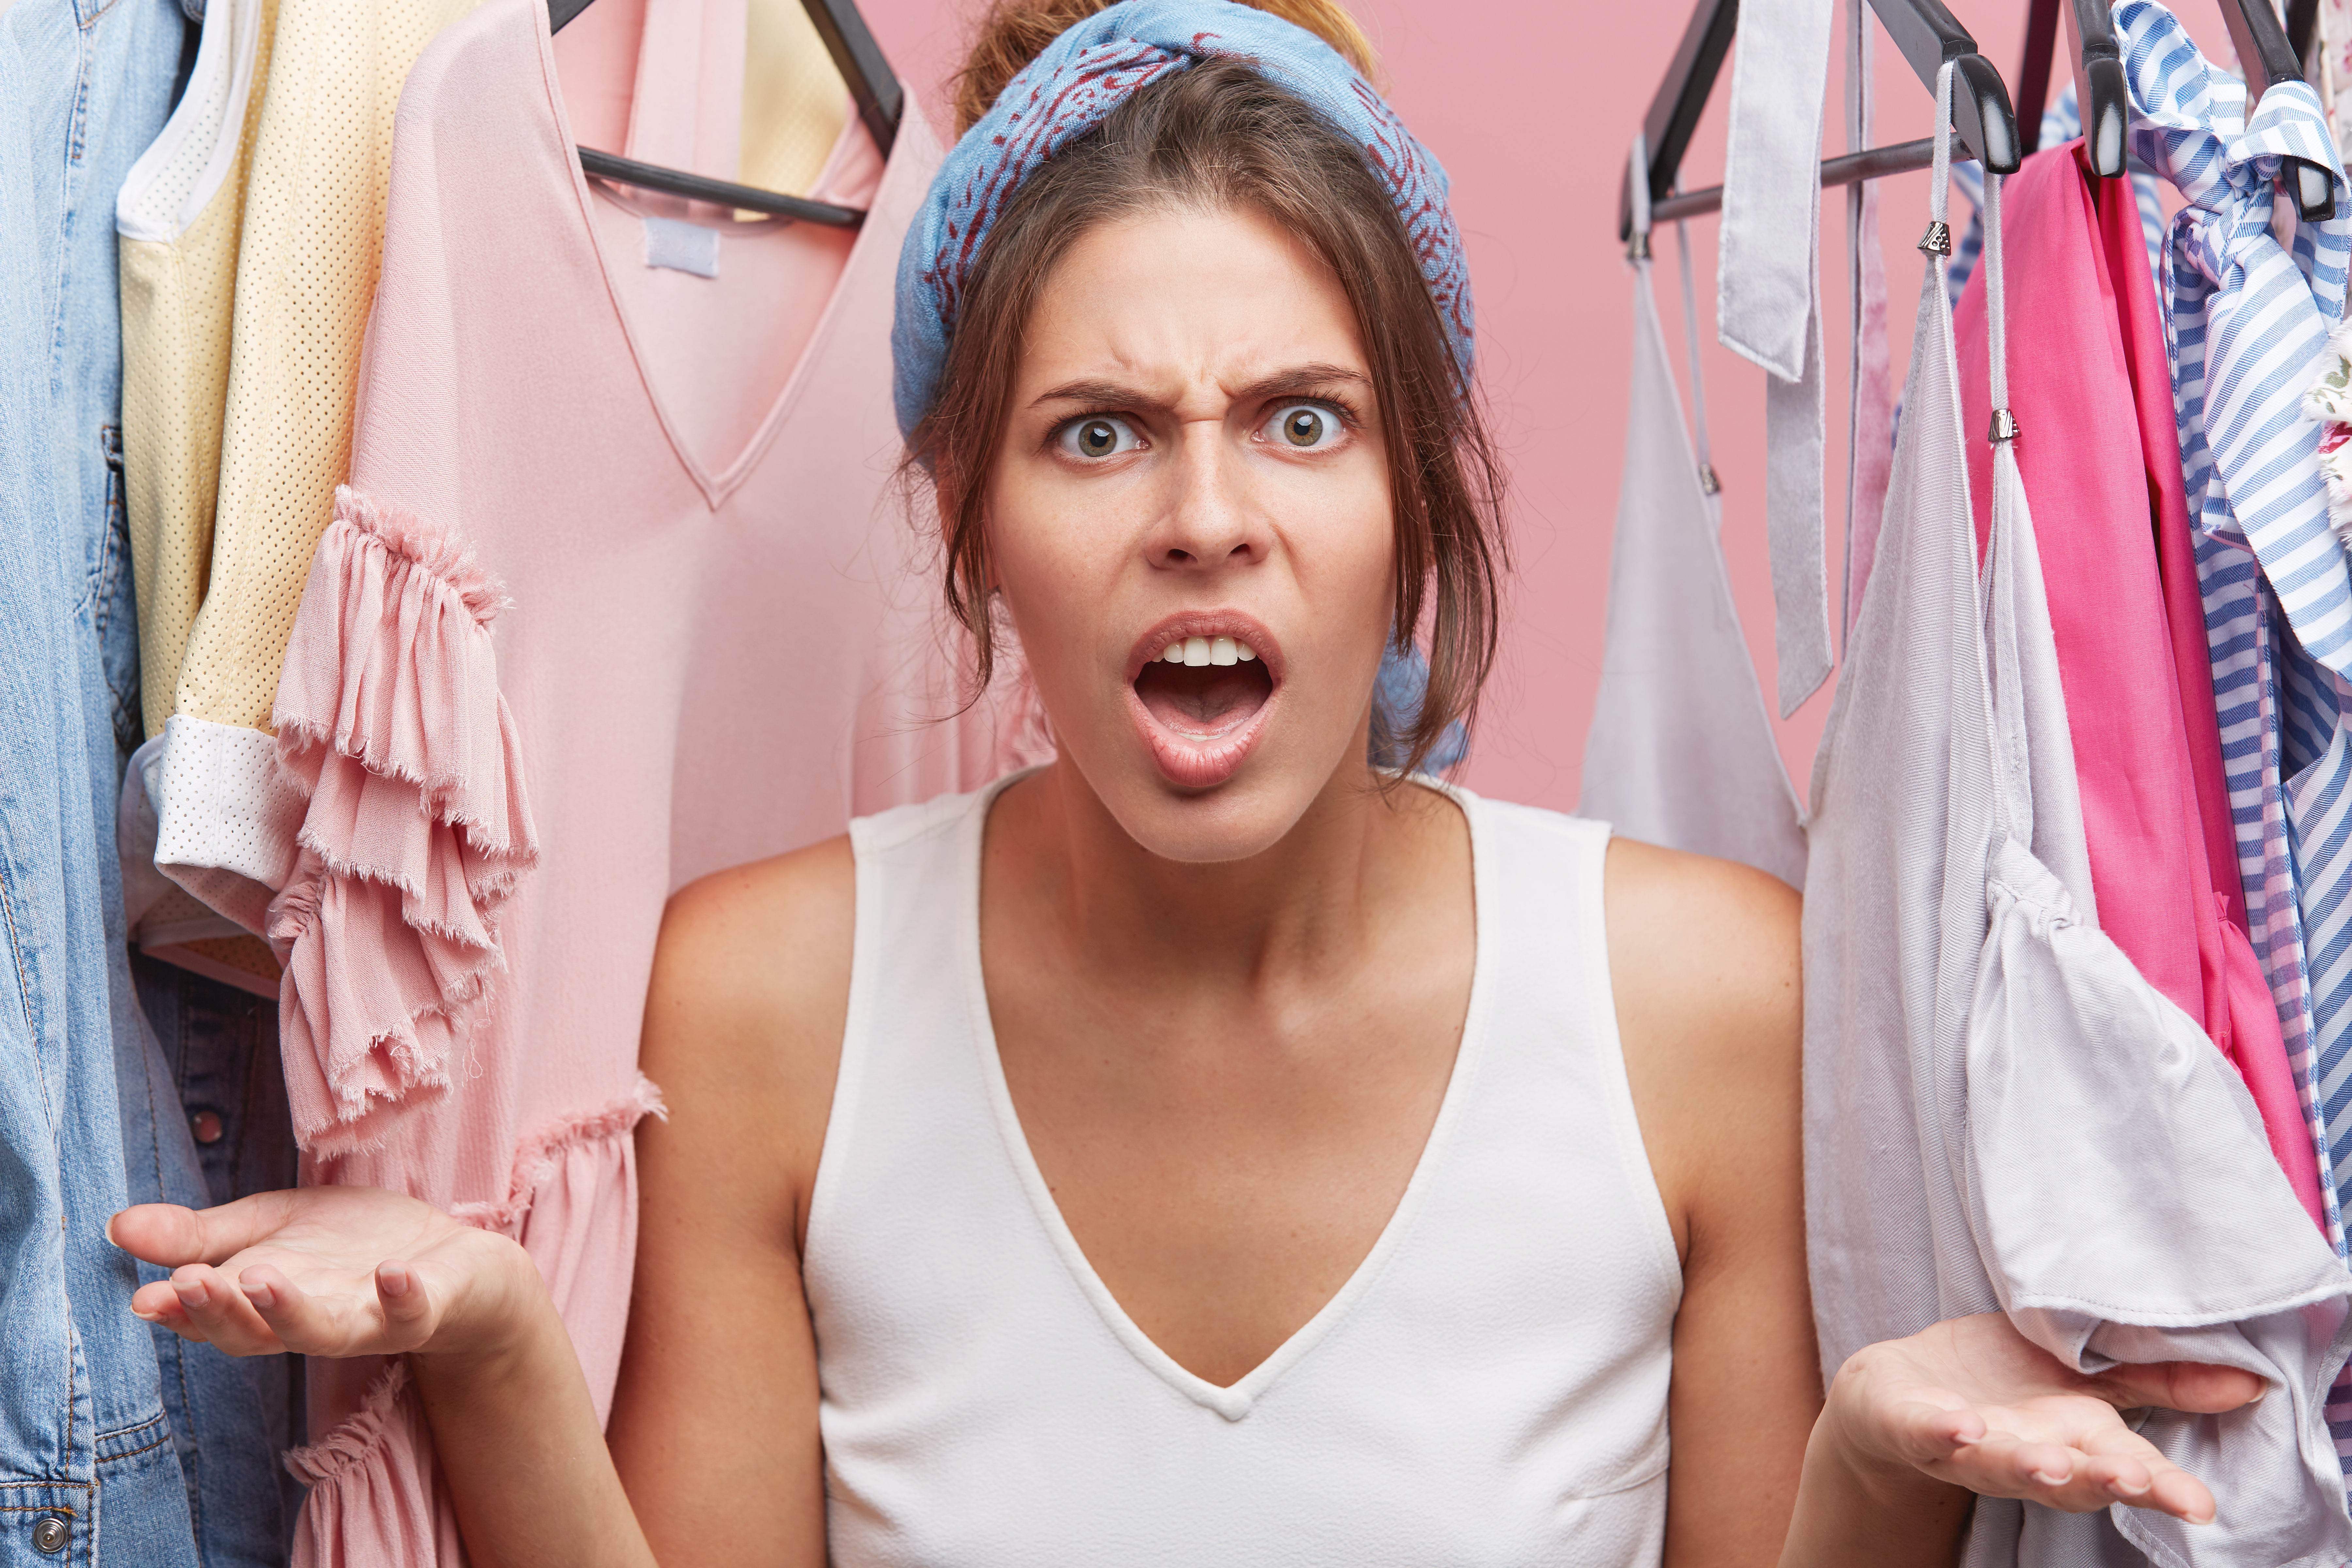 Woman furious while standing in the middle of clothes | Source: Freepik